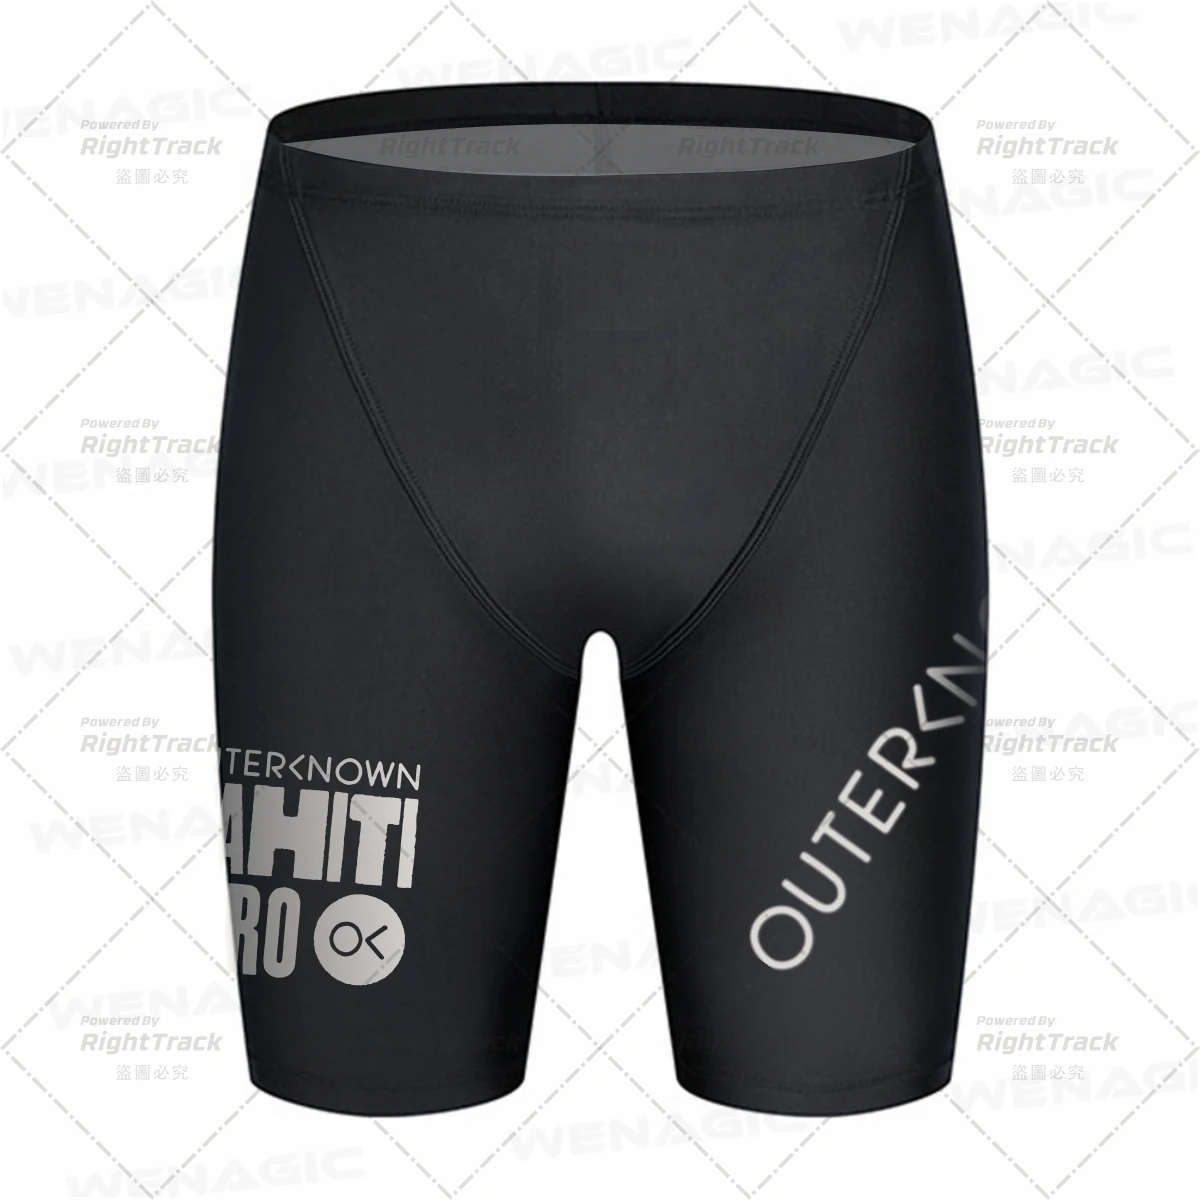 Outerknown Surfing Shorts Men's Summer Tight-fitting Surf Bottoms Performance Trunks Beach OK Swim Pants